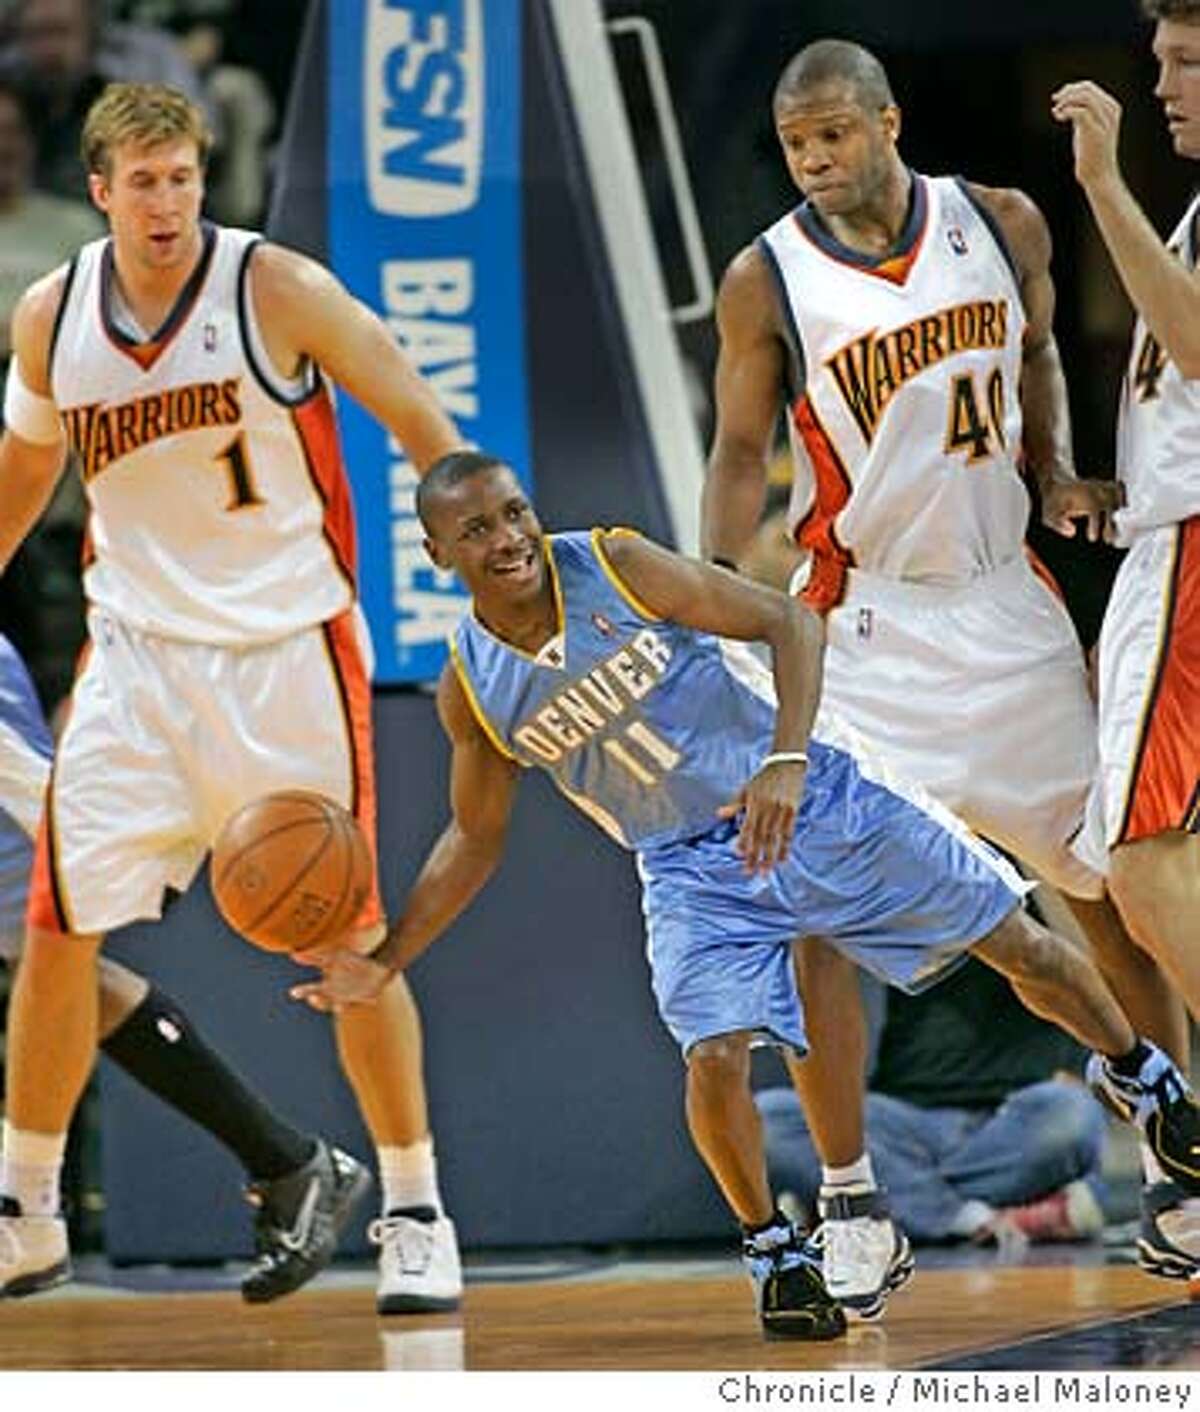 Five foot five Earl Boykins of Denver looks for someone to pass to as Warriors #1 Troy Murphy, #40 Calbert Cheaney and 34 Mike Dunleavy look on in the 2nd period. Golden State Warriors vs Denver Nuggets at The Arena in Oakland. Event in Oakland, CA Photo by Michael Maloney / The Chronicle